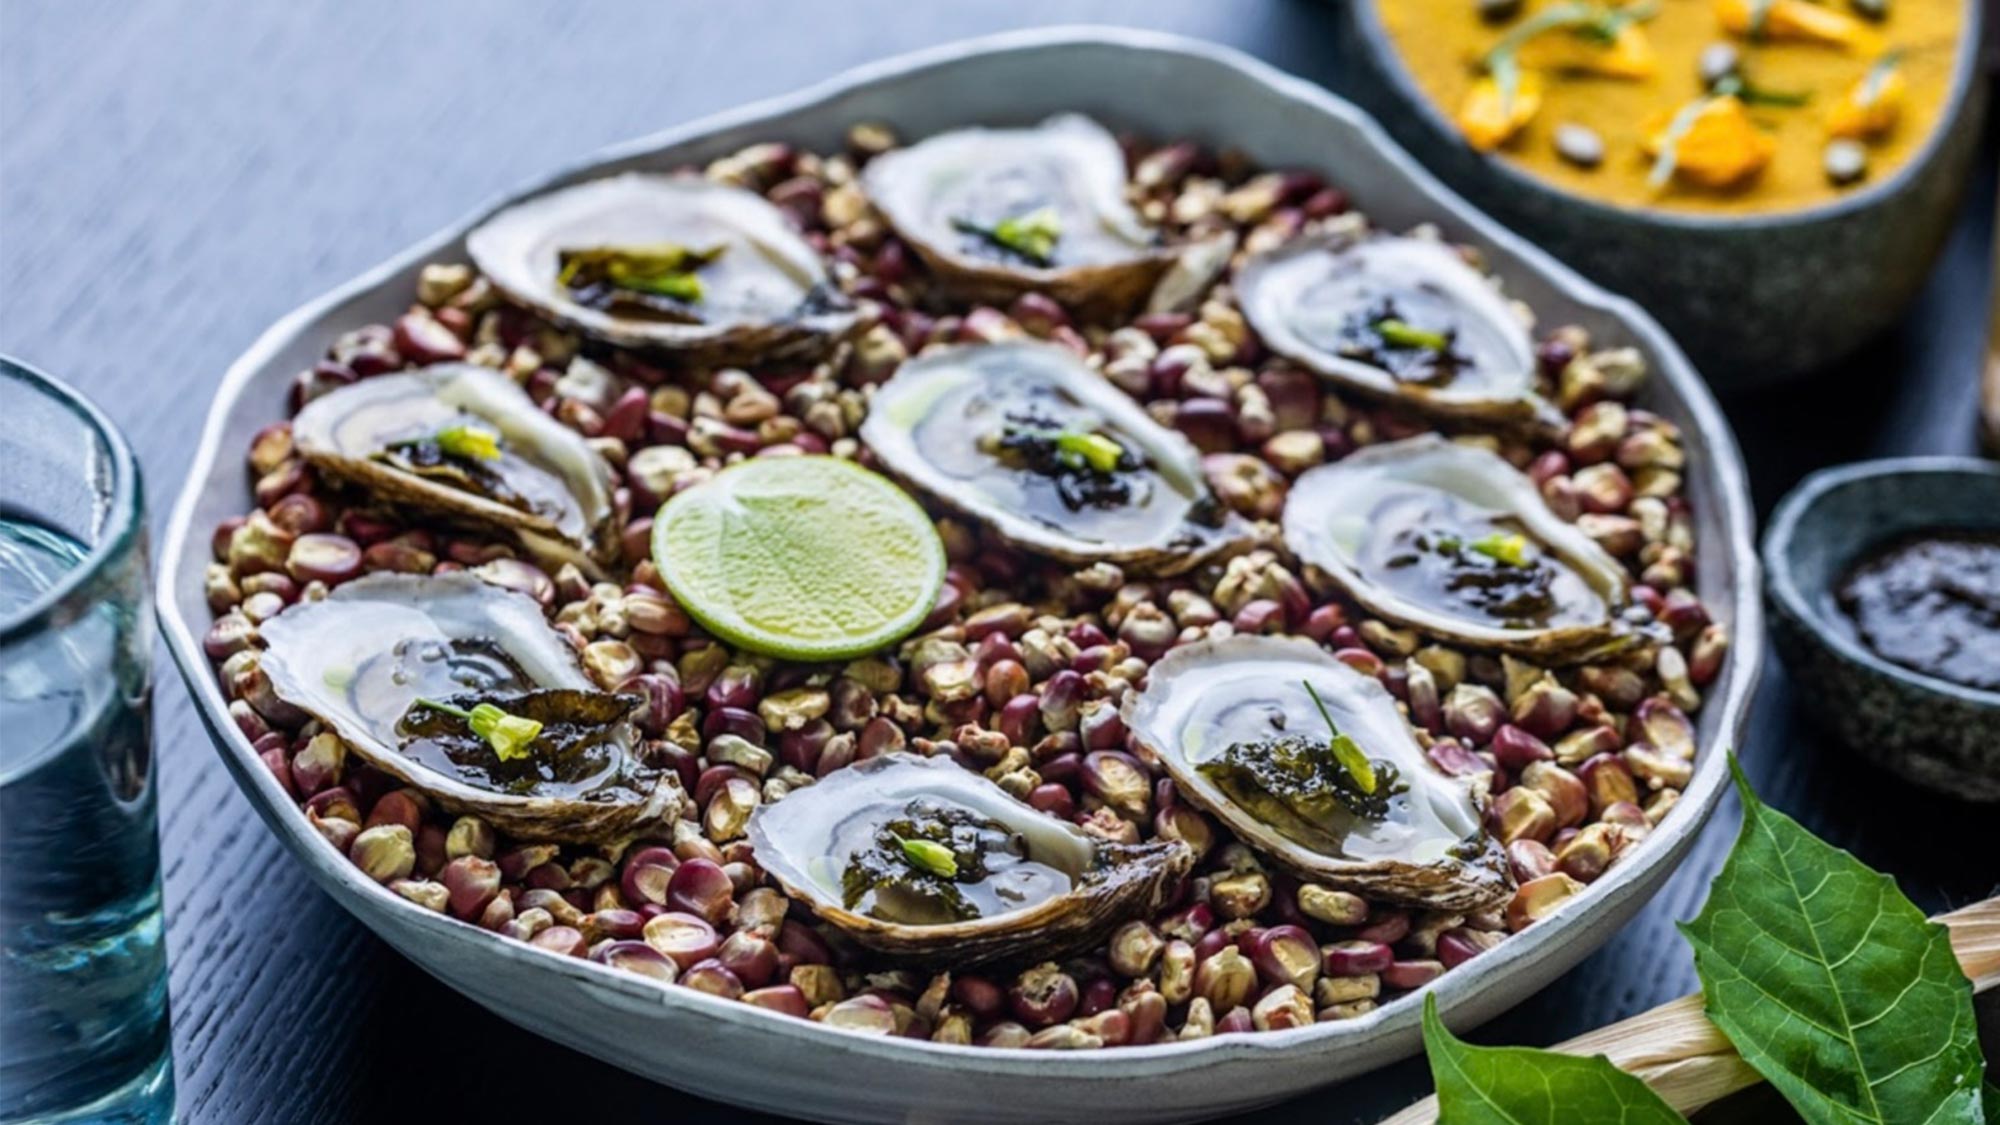 Bacalar oysters